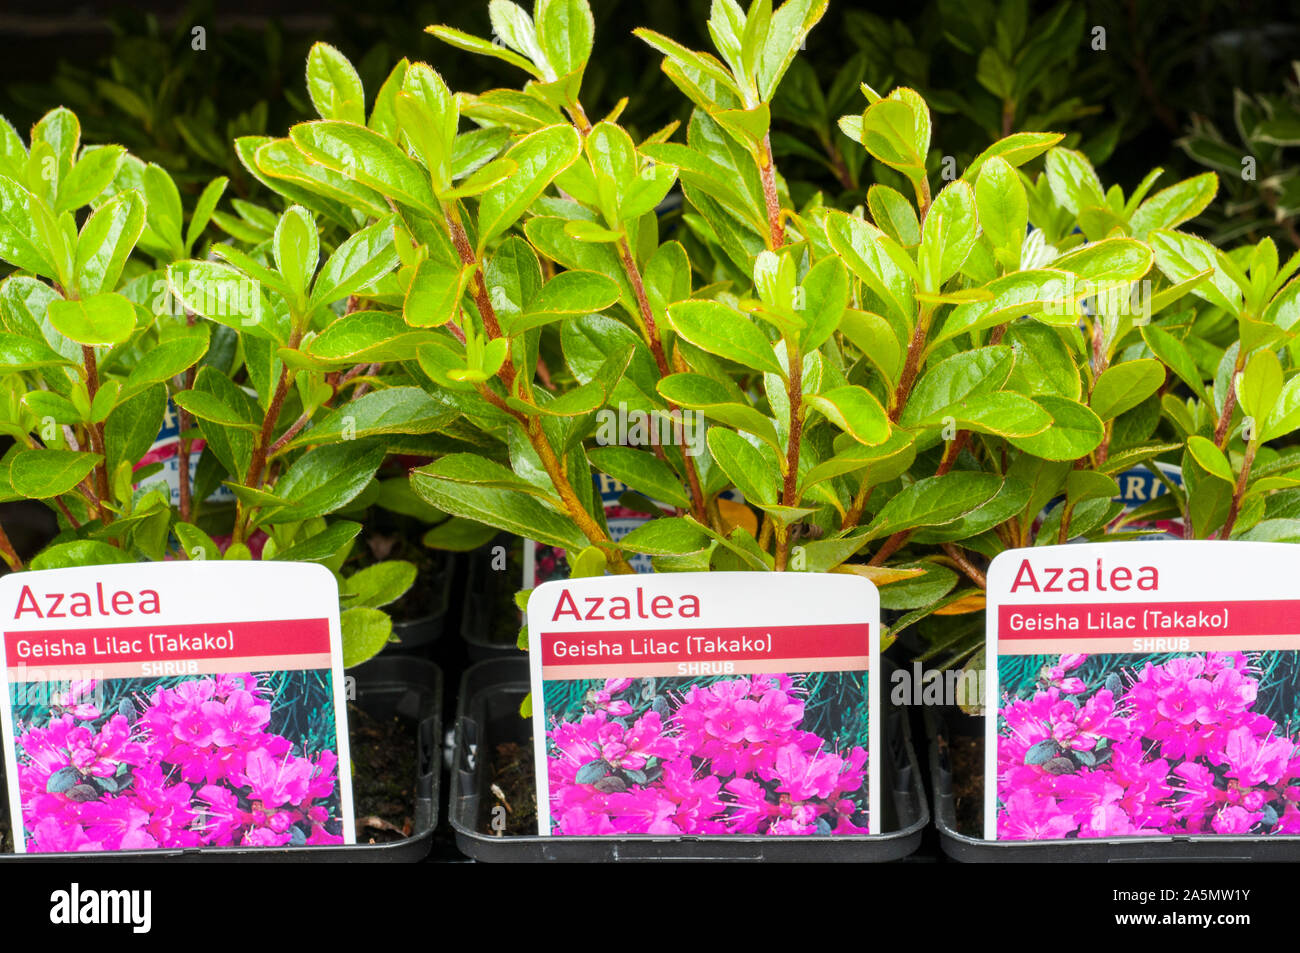 Young Rhododendron Azalea Geisha Lilac plants in 9cm pots growing on in autumn. These are Aronense Hybrids that are an evergreen shrub and fully hardy Stock Photo